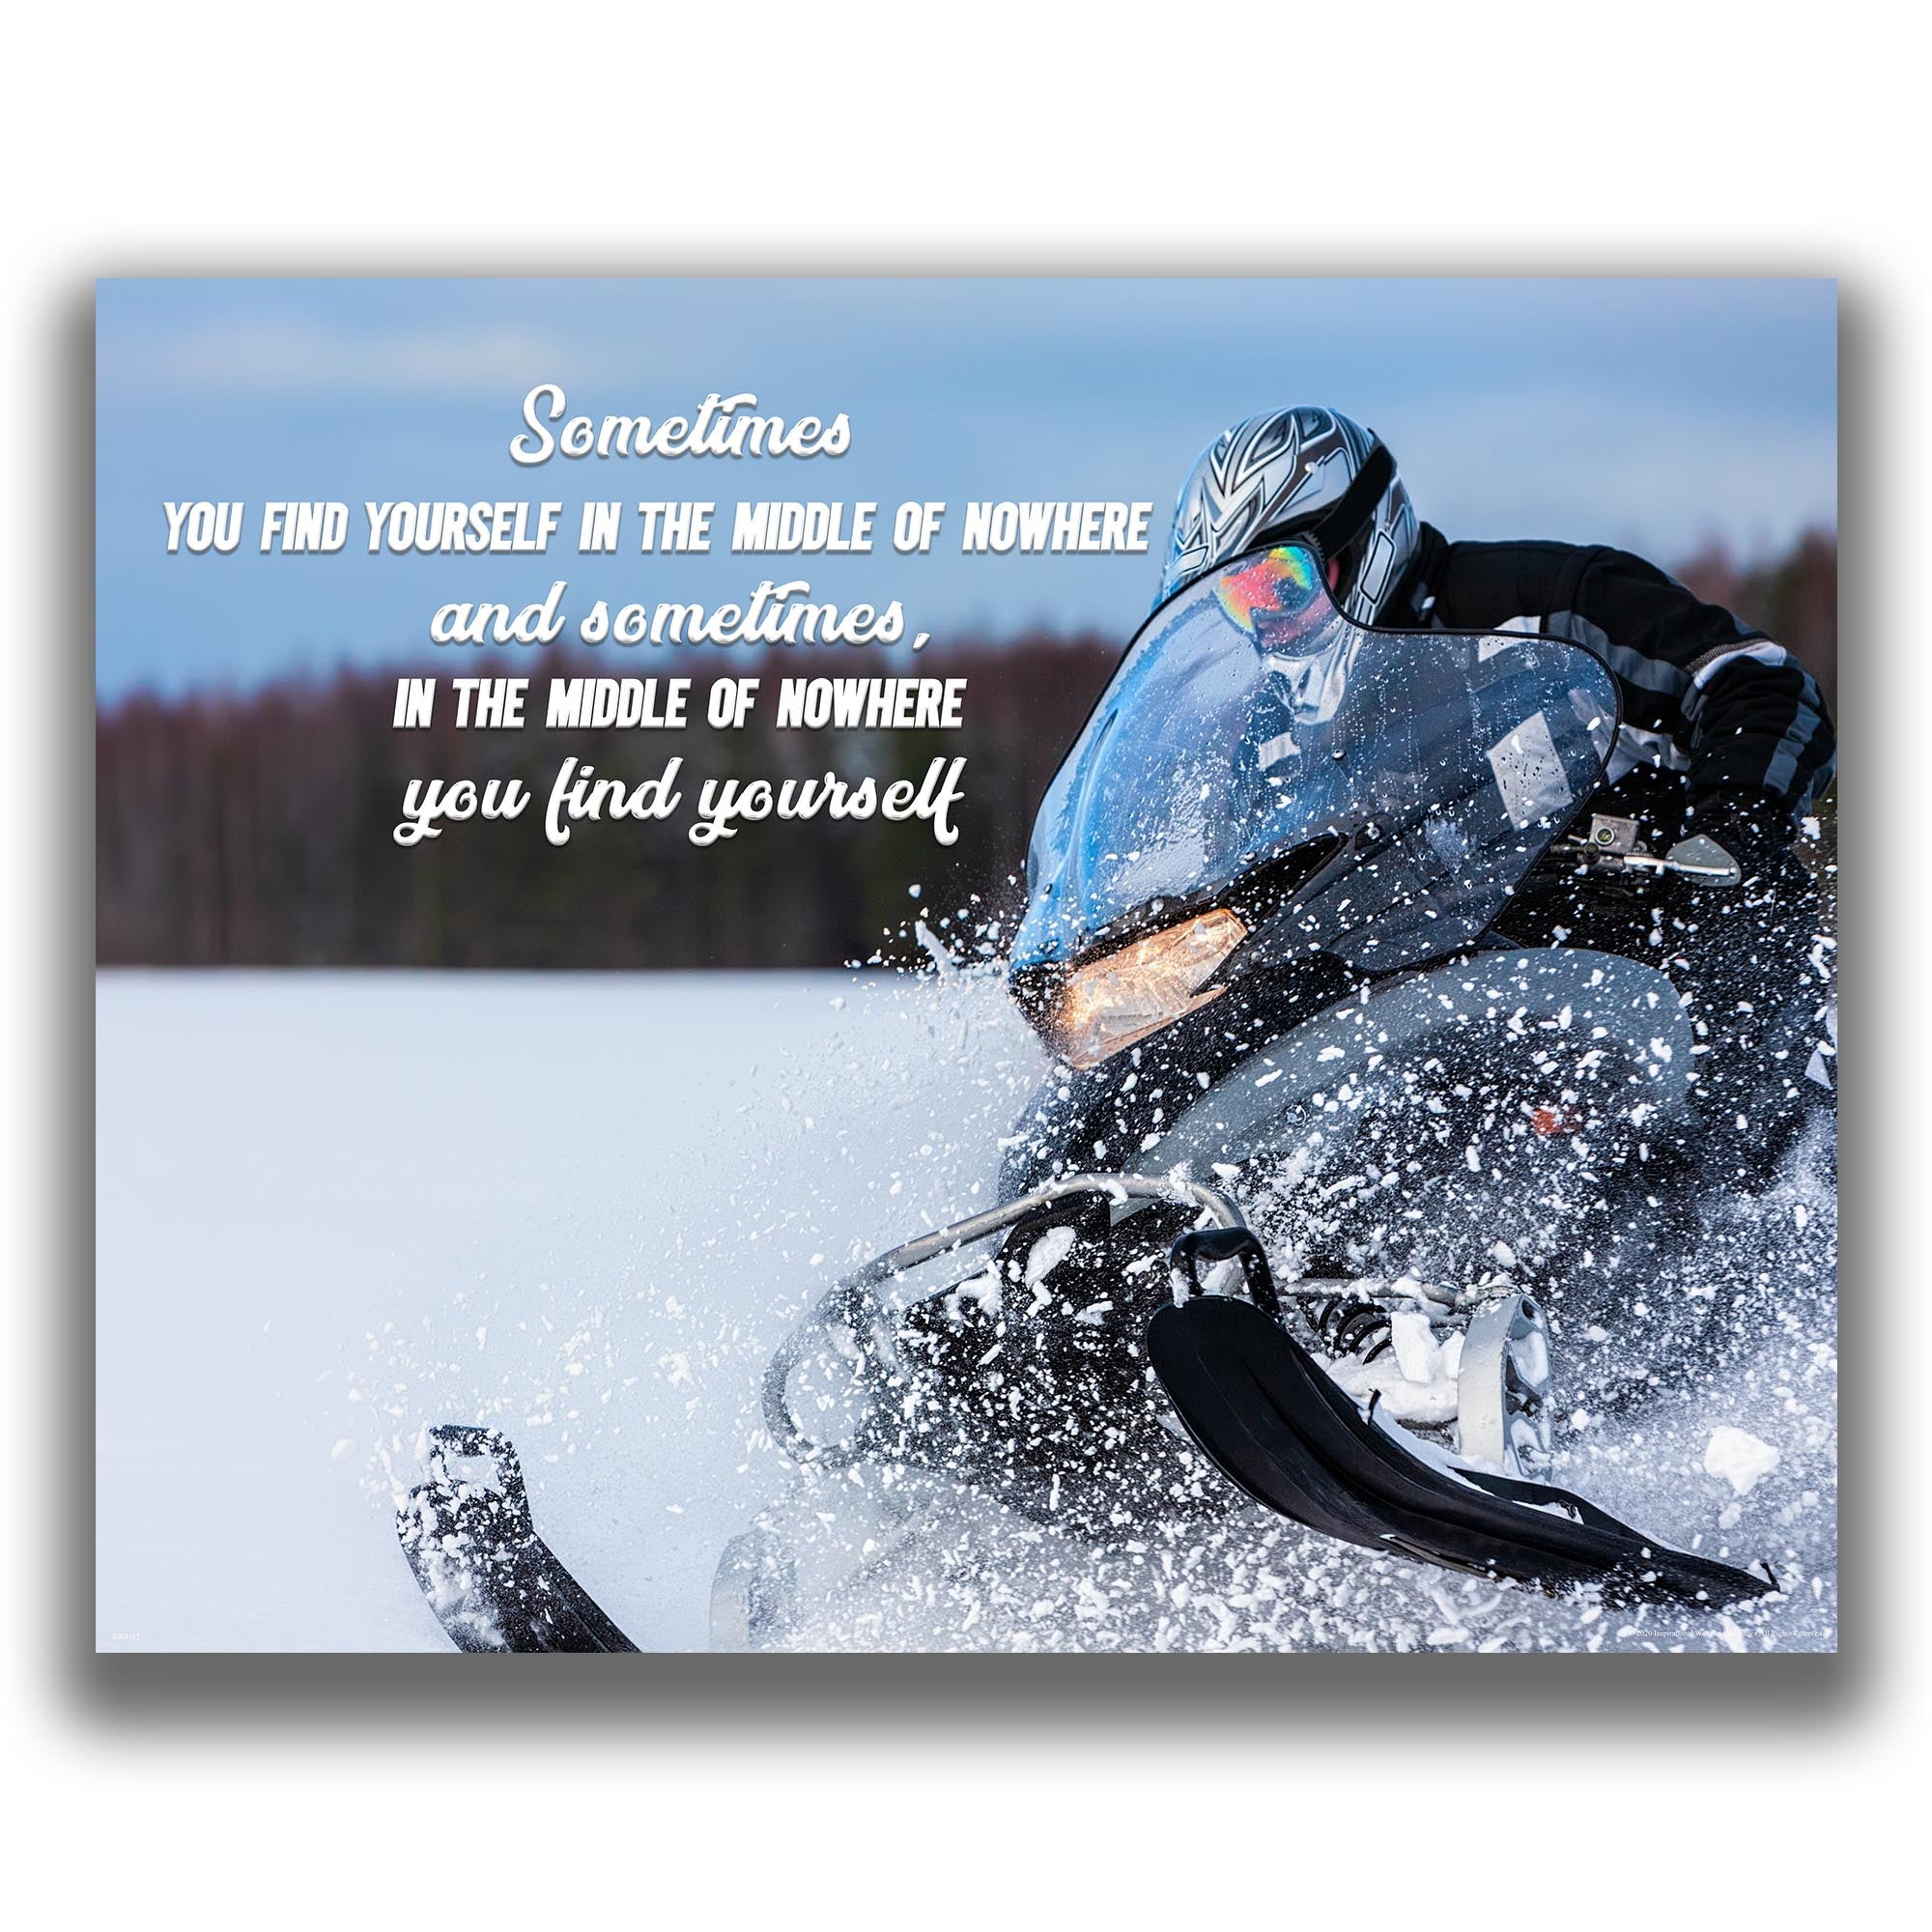 Find Yourself - Snowmobile Poster